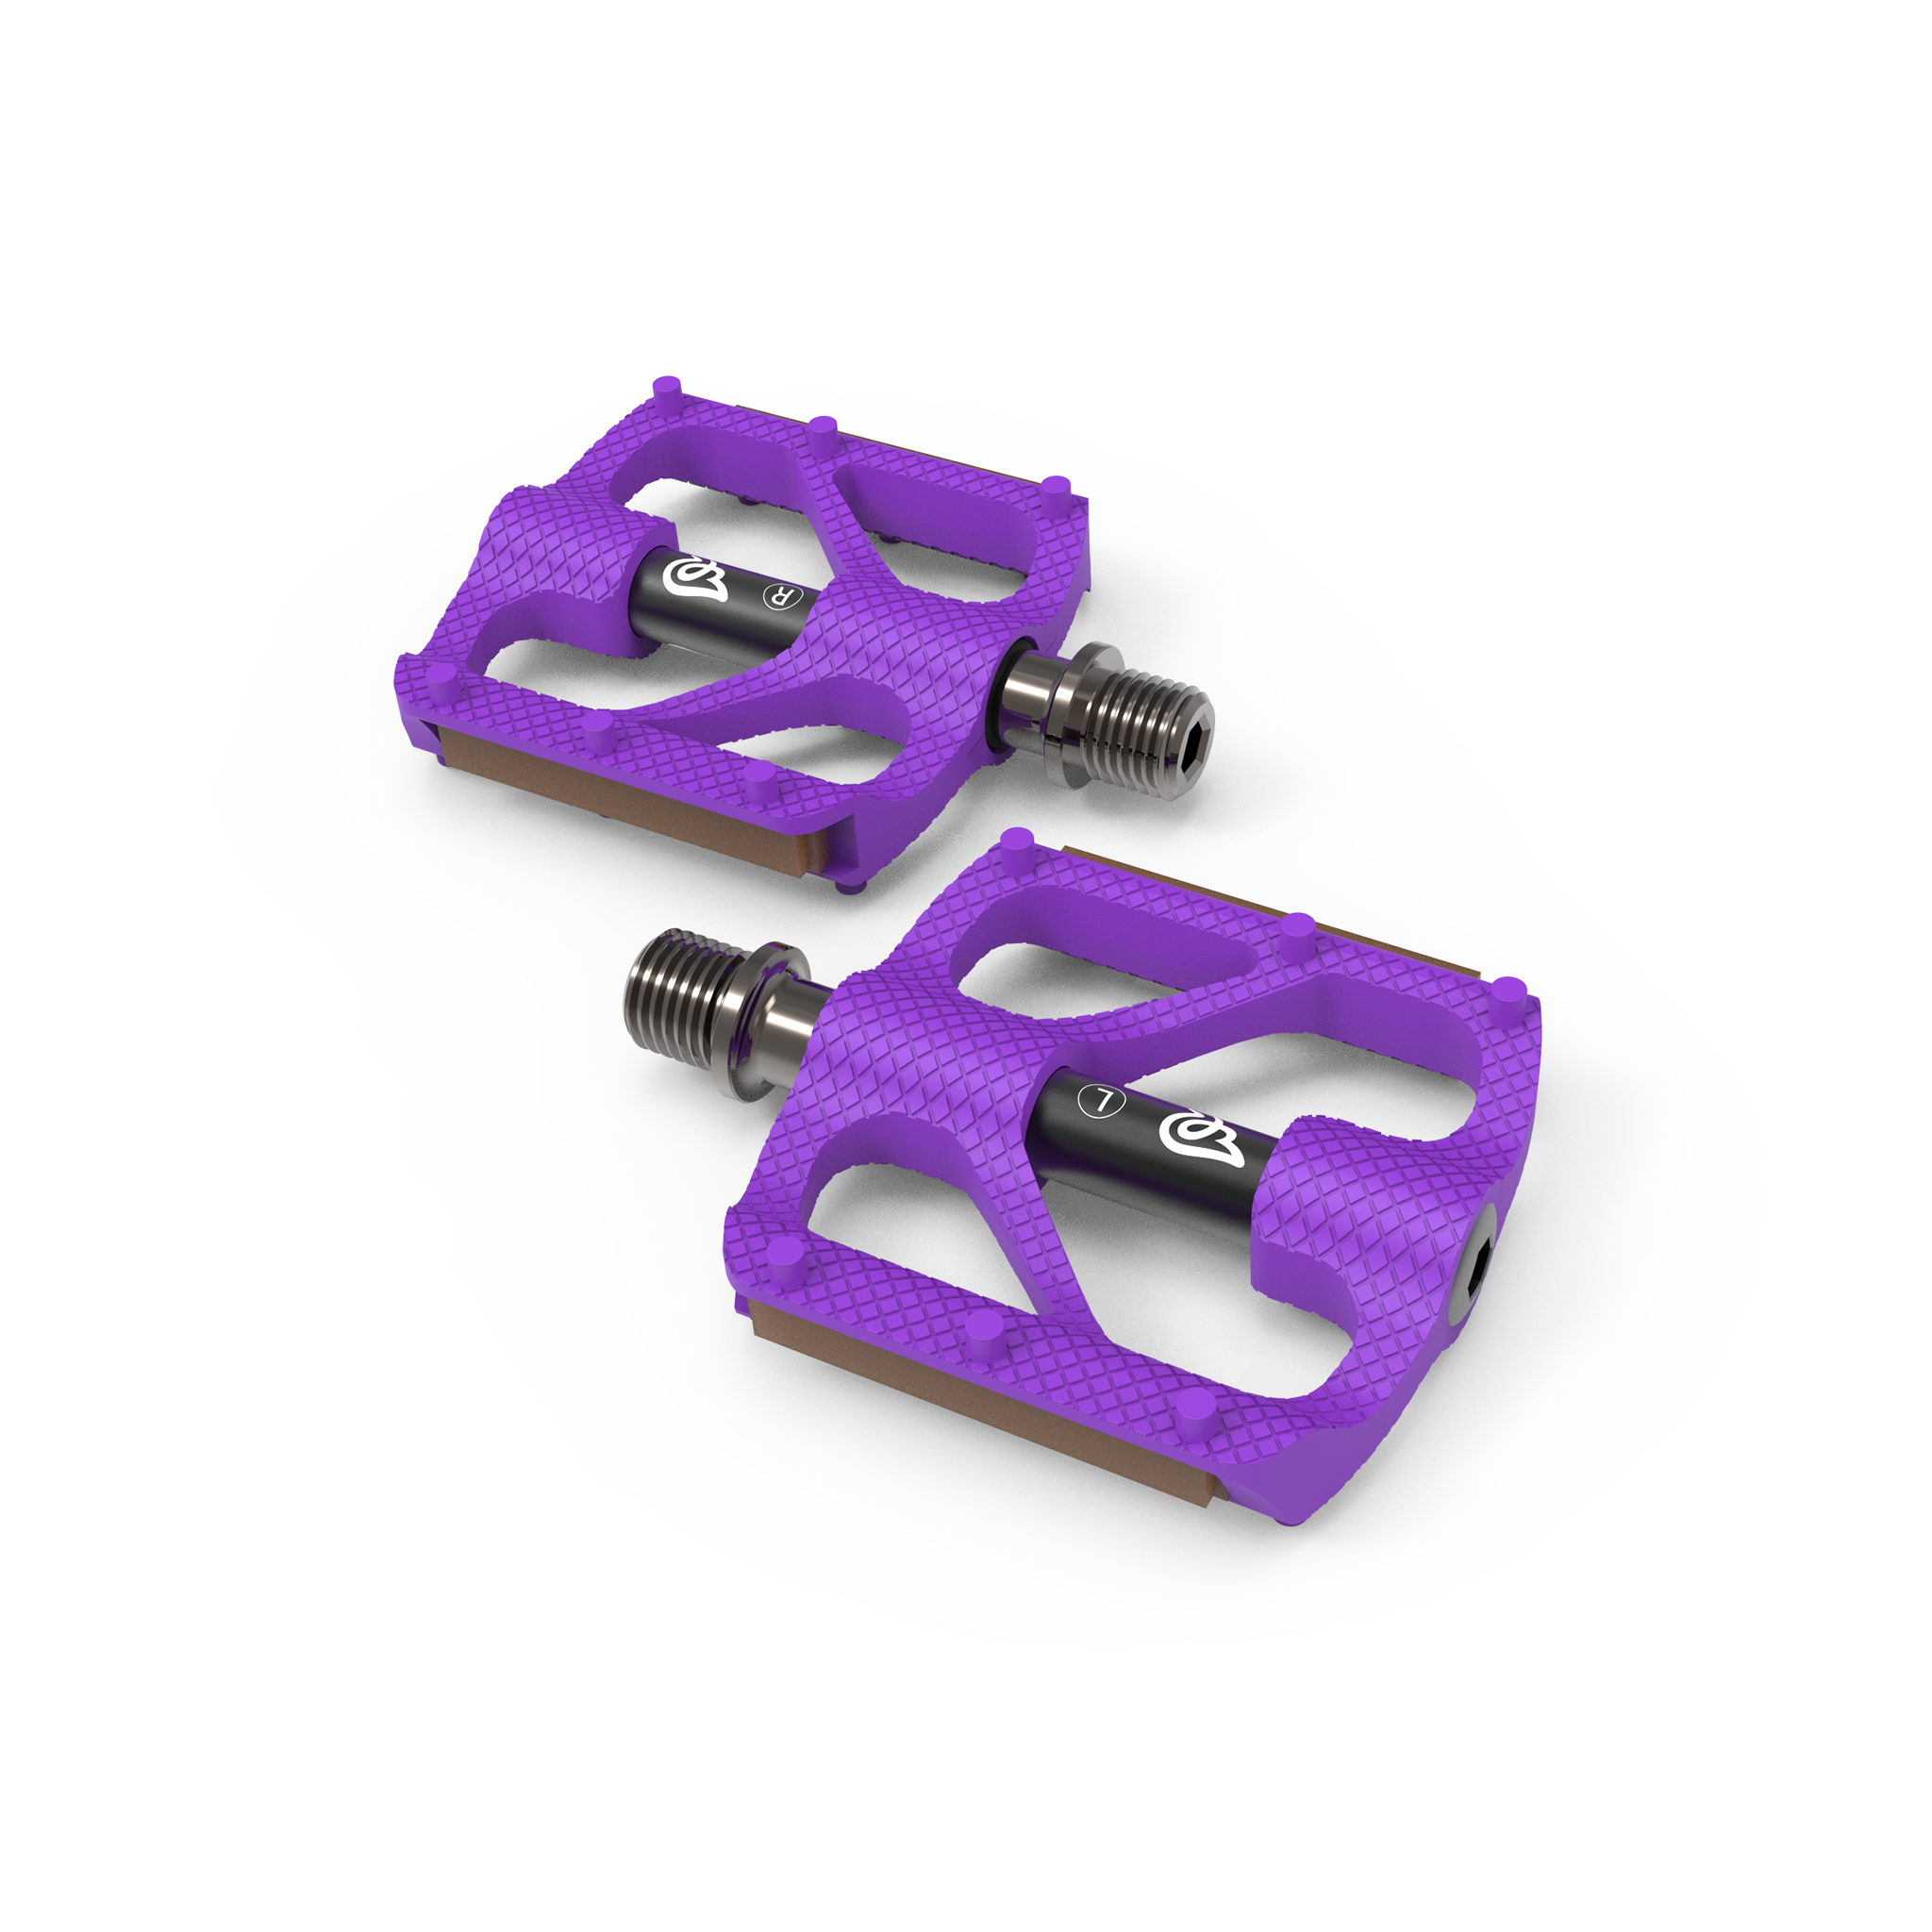 Early Rider P1 Resin Platform Pedals